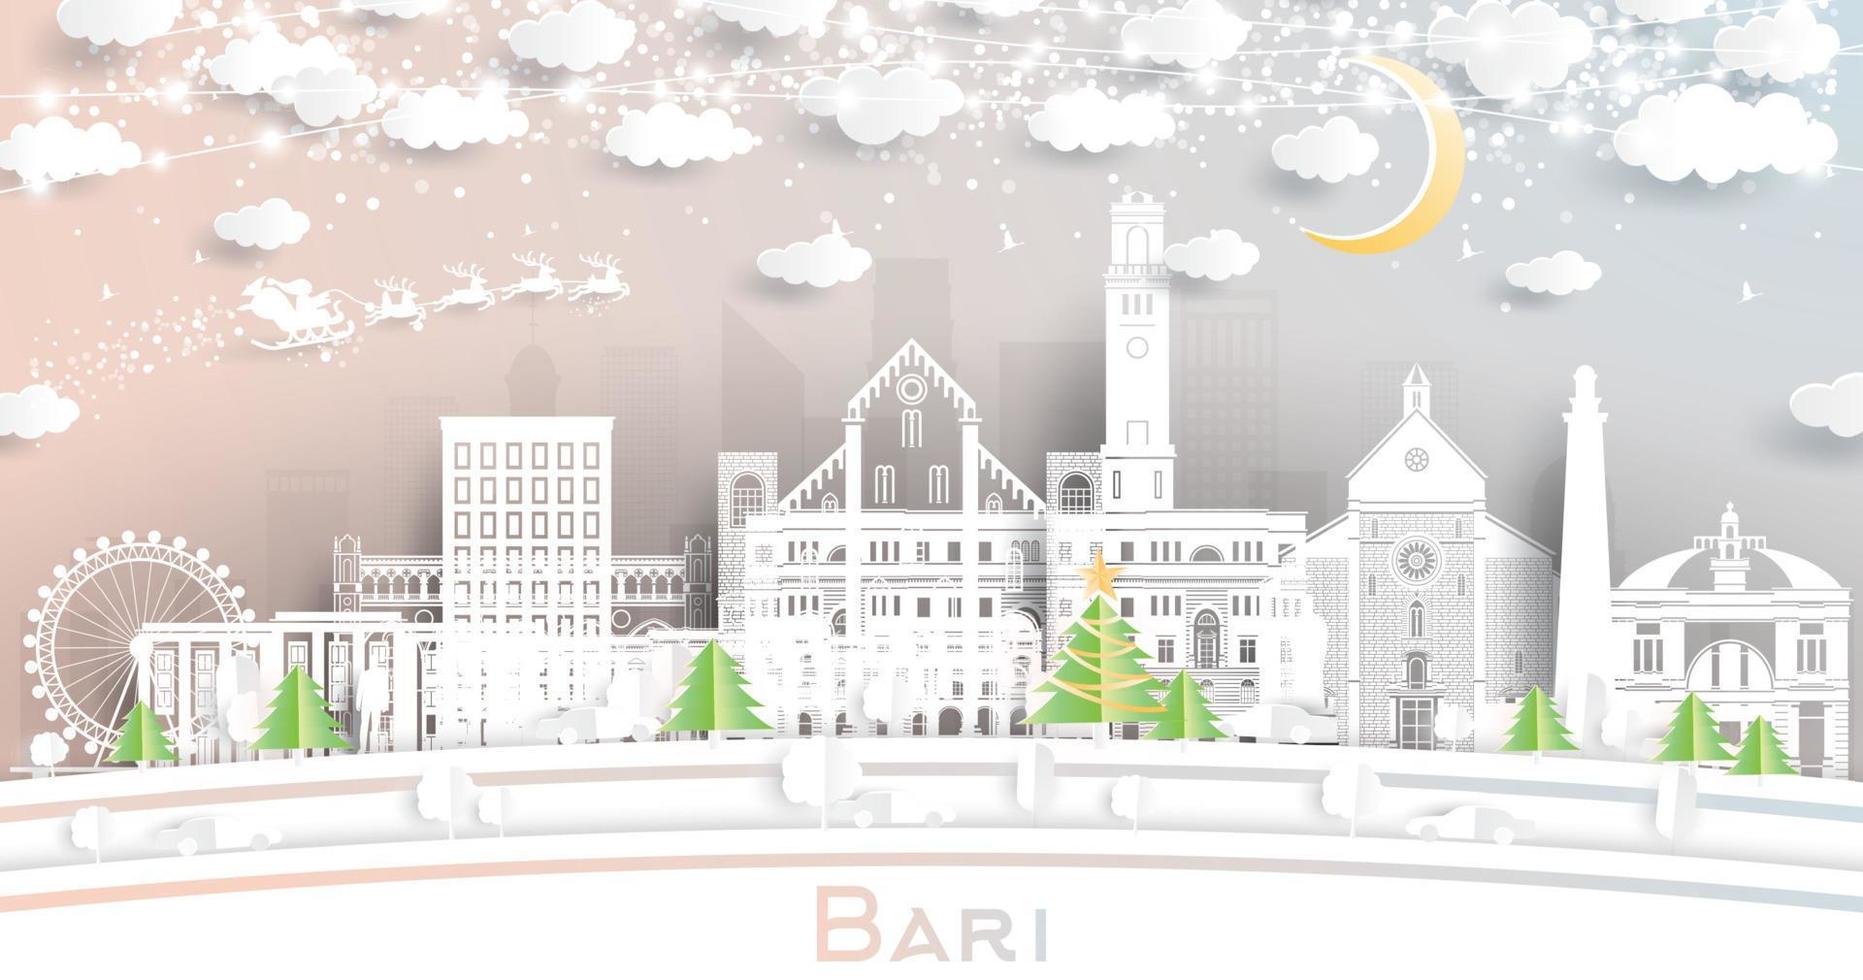 Bari Italy City Skyline in Paper Cut Style with Snowflakes, Moon and Neon Garland. vector